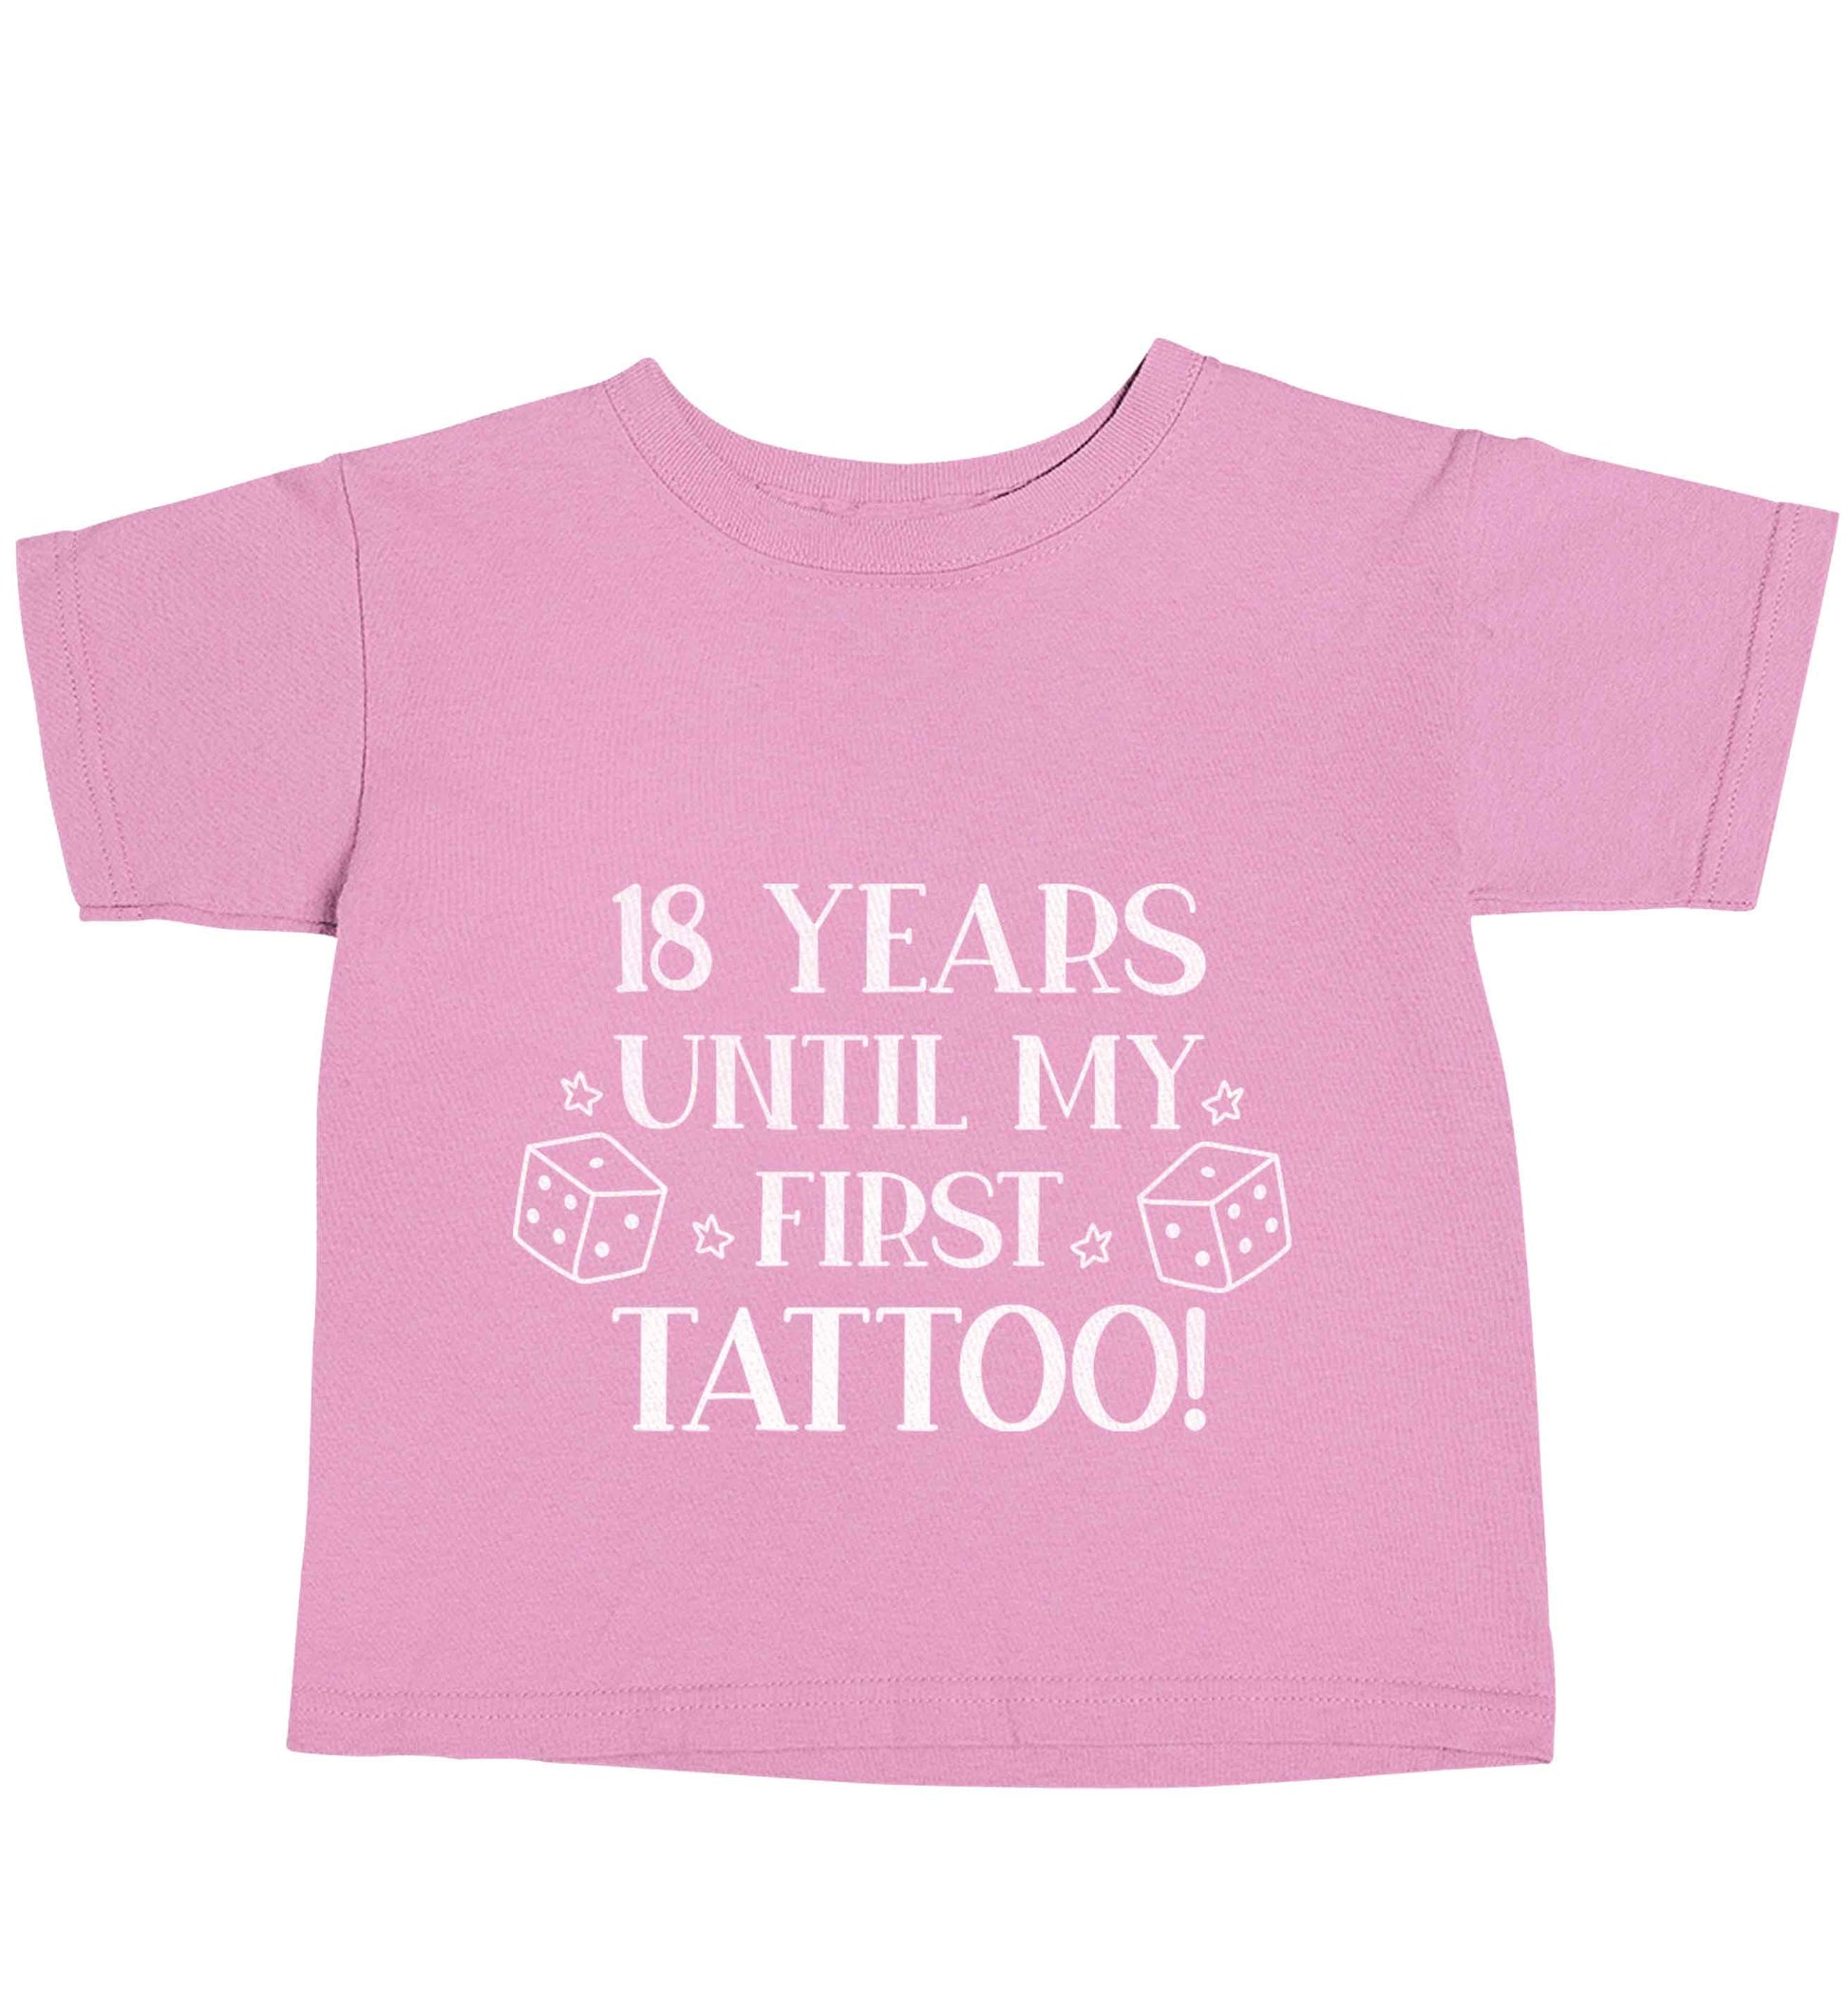 18 Years Until my First Tattoo light pink baby toddler Tshirt 2 Years